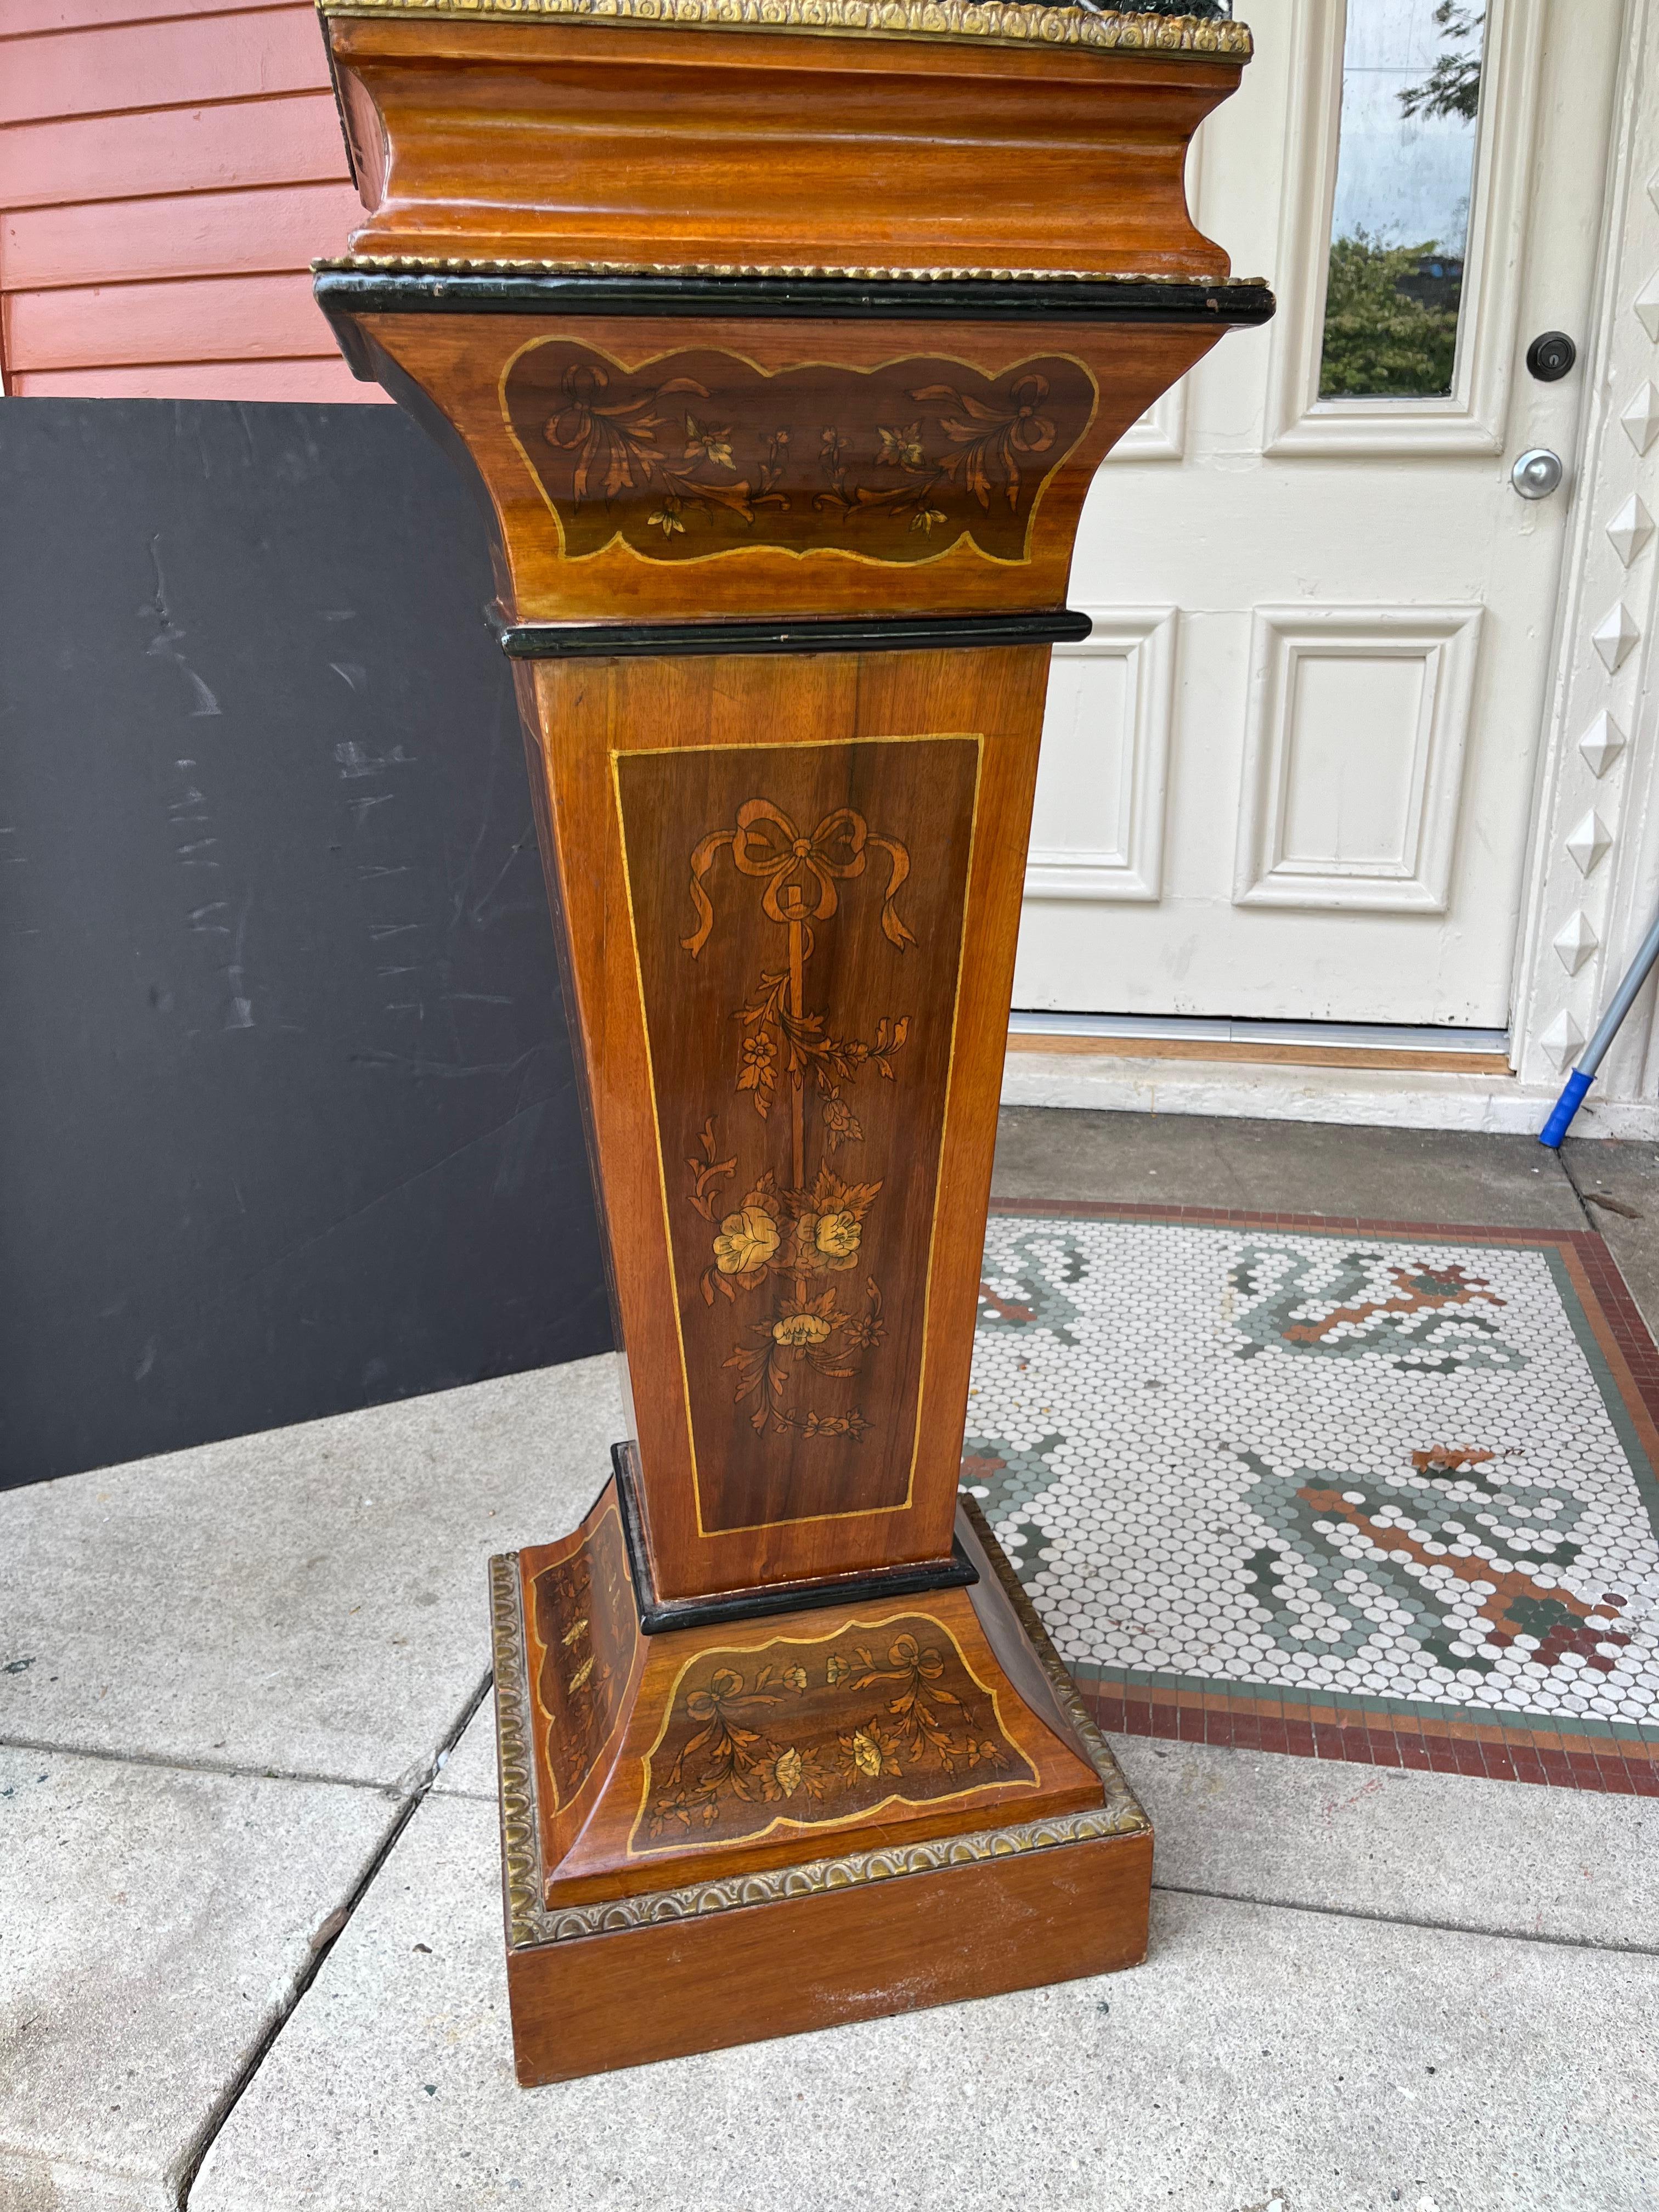 The pedestal with floral decoration in set panels on all 4 sides .Some in-Painting or stenciling to heighten sense of contrast.

This style pedestal was originally designed to hold clocks ,busts, urns or vases .Often finished ( as is this one )in